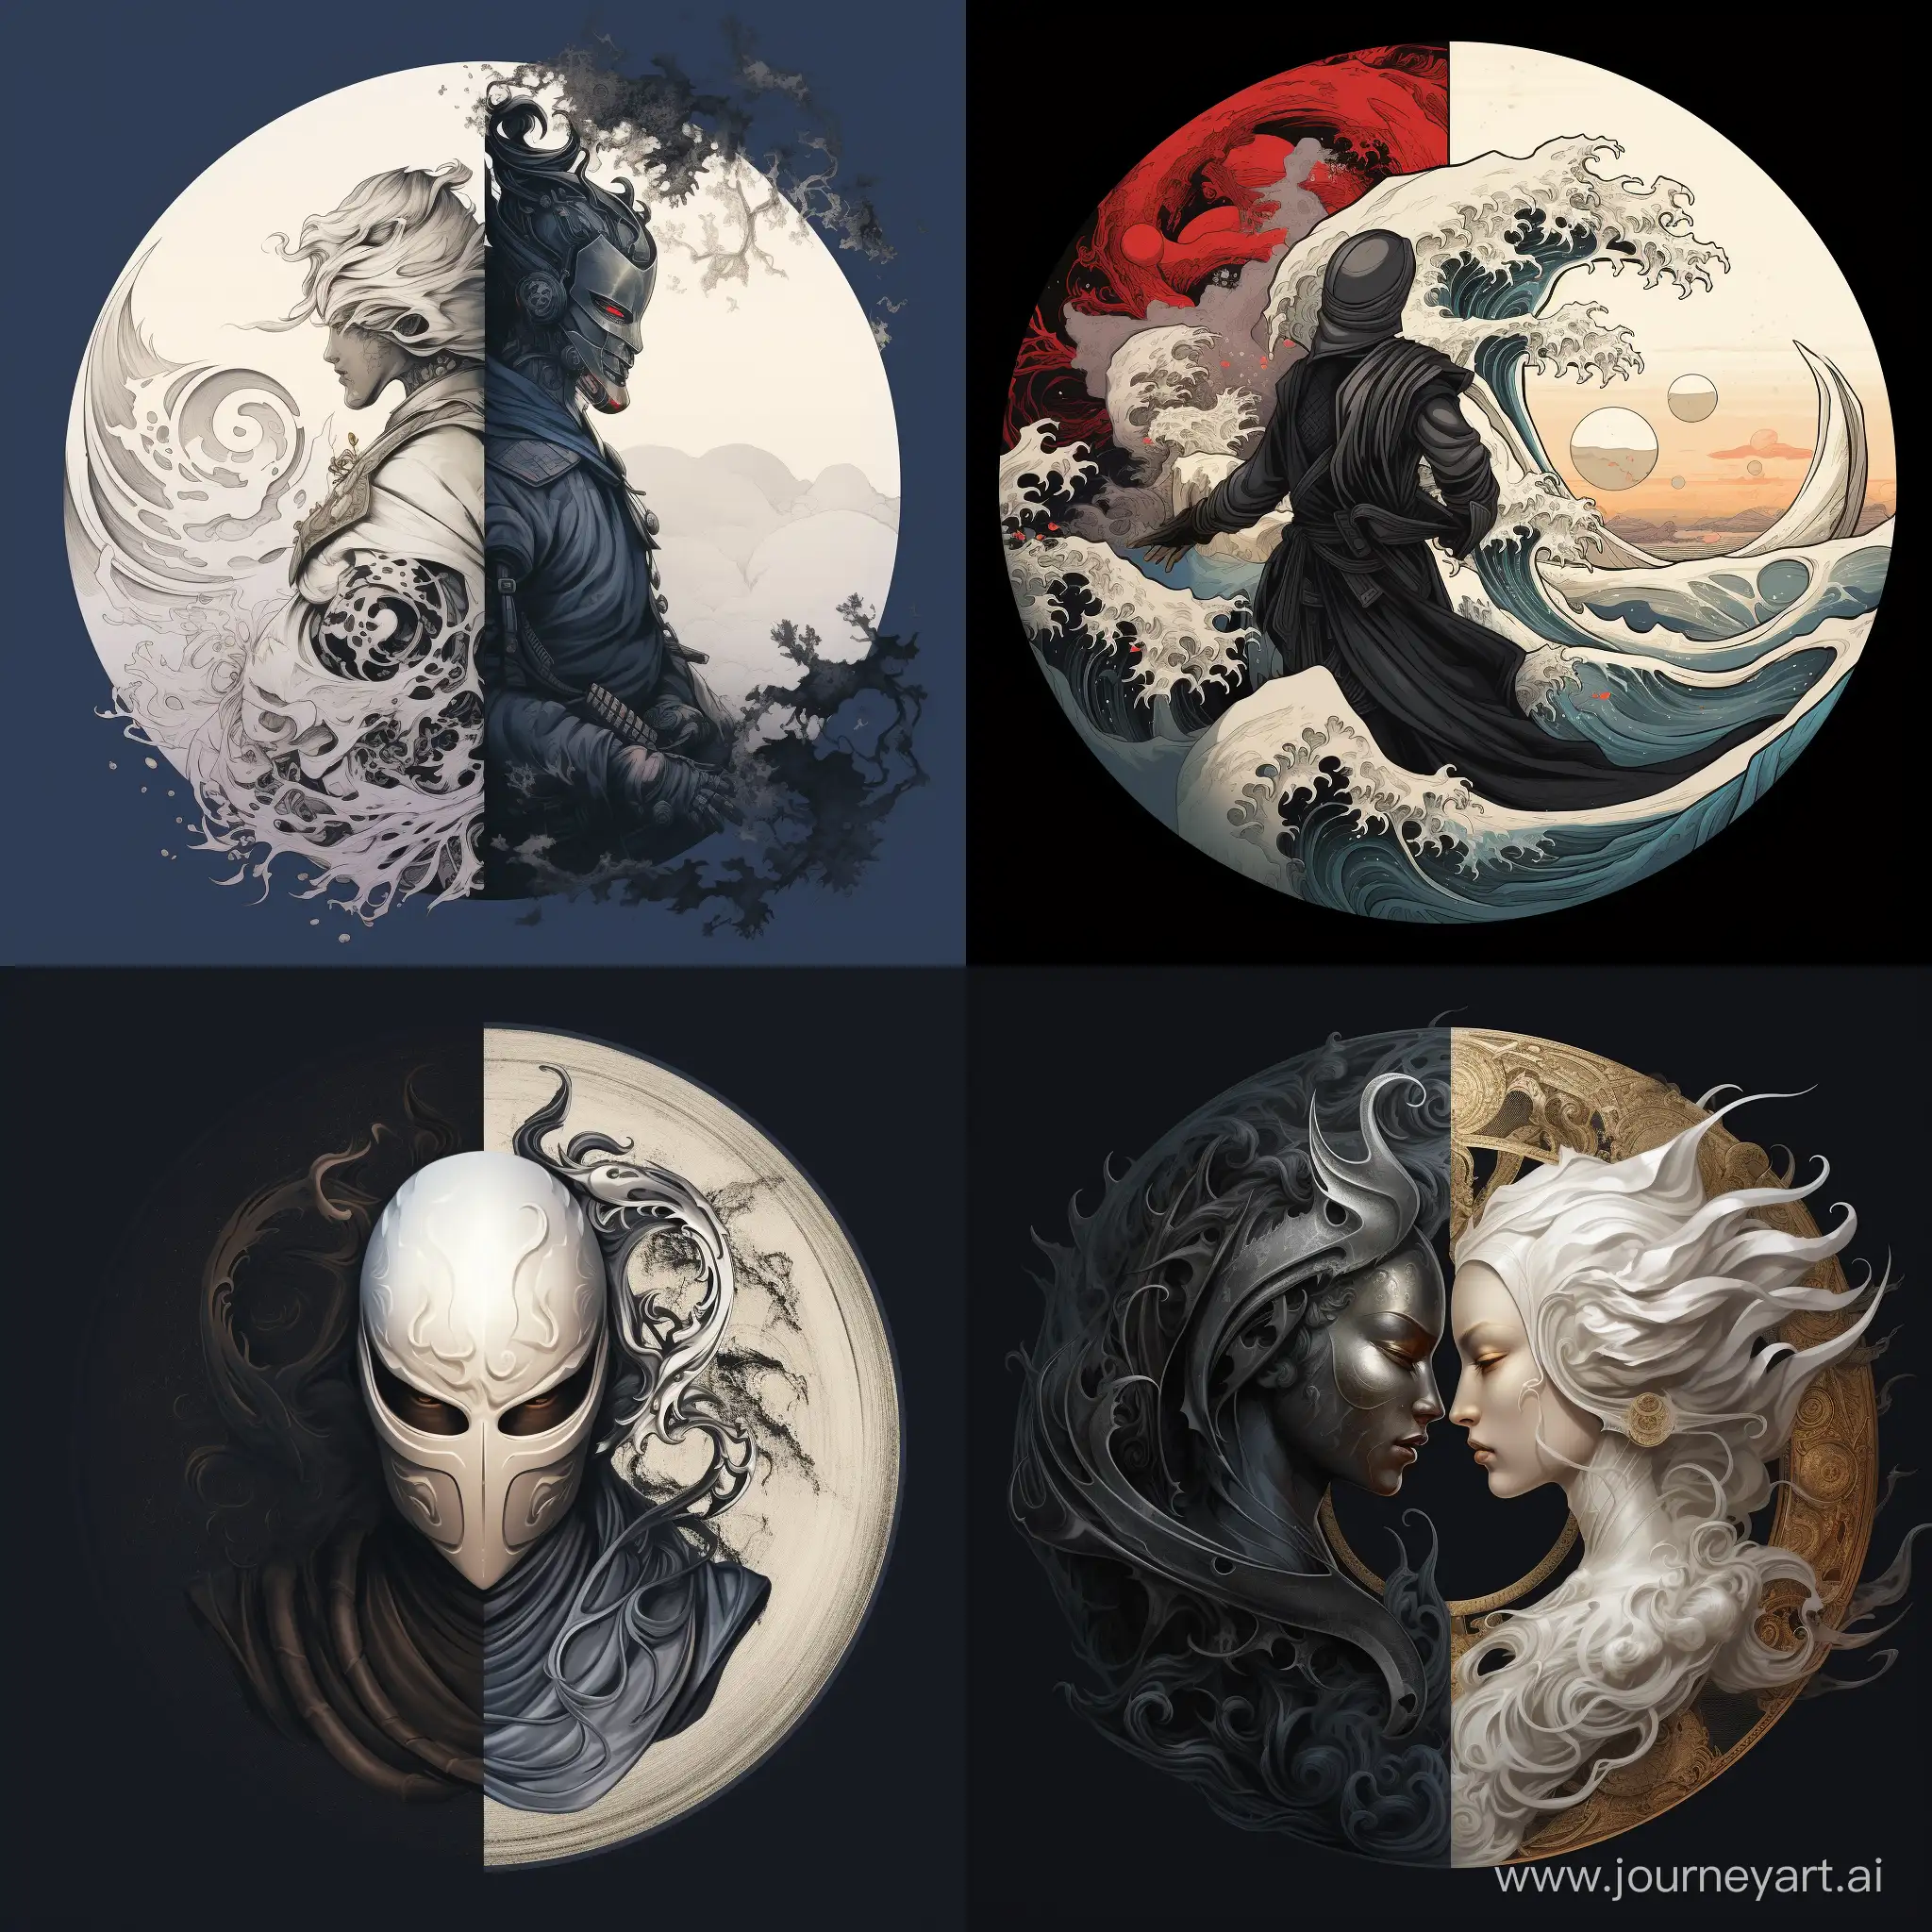 Harmony-in-Duality-Yin-Yang-White-and-Black-Knight-Illustration